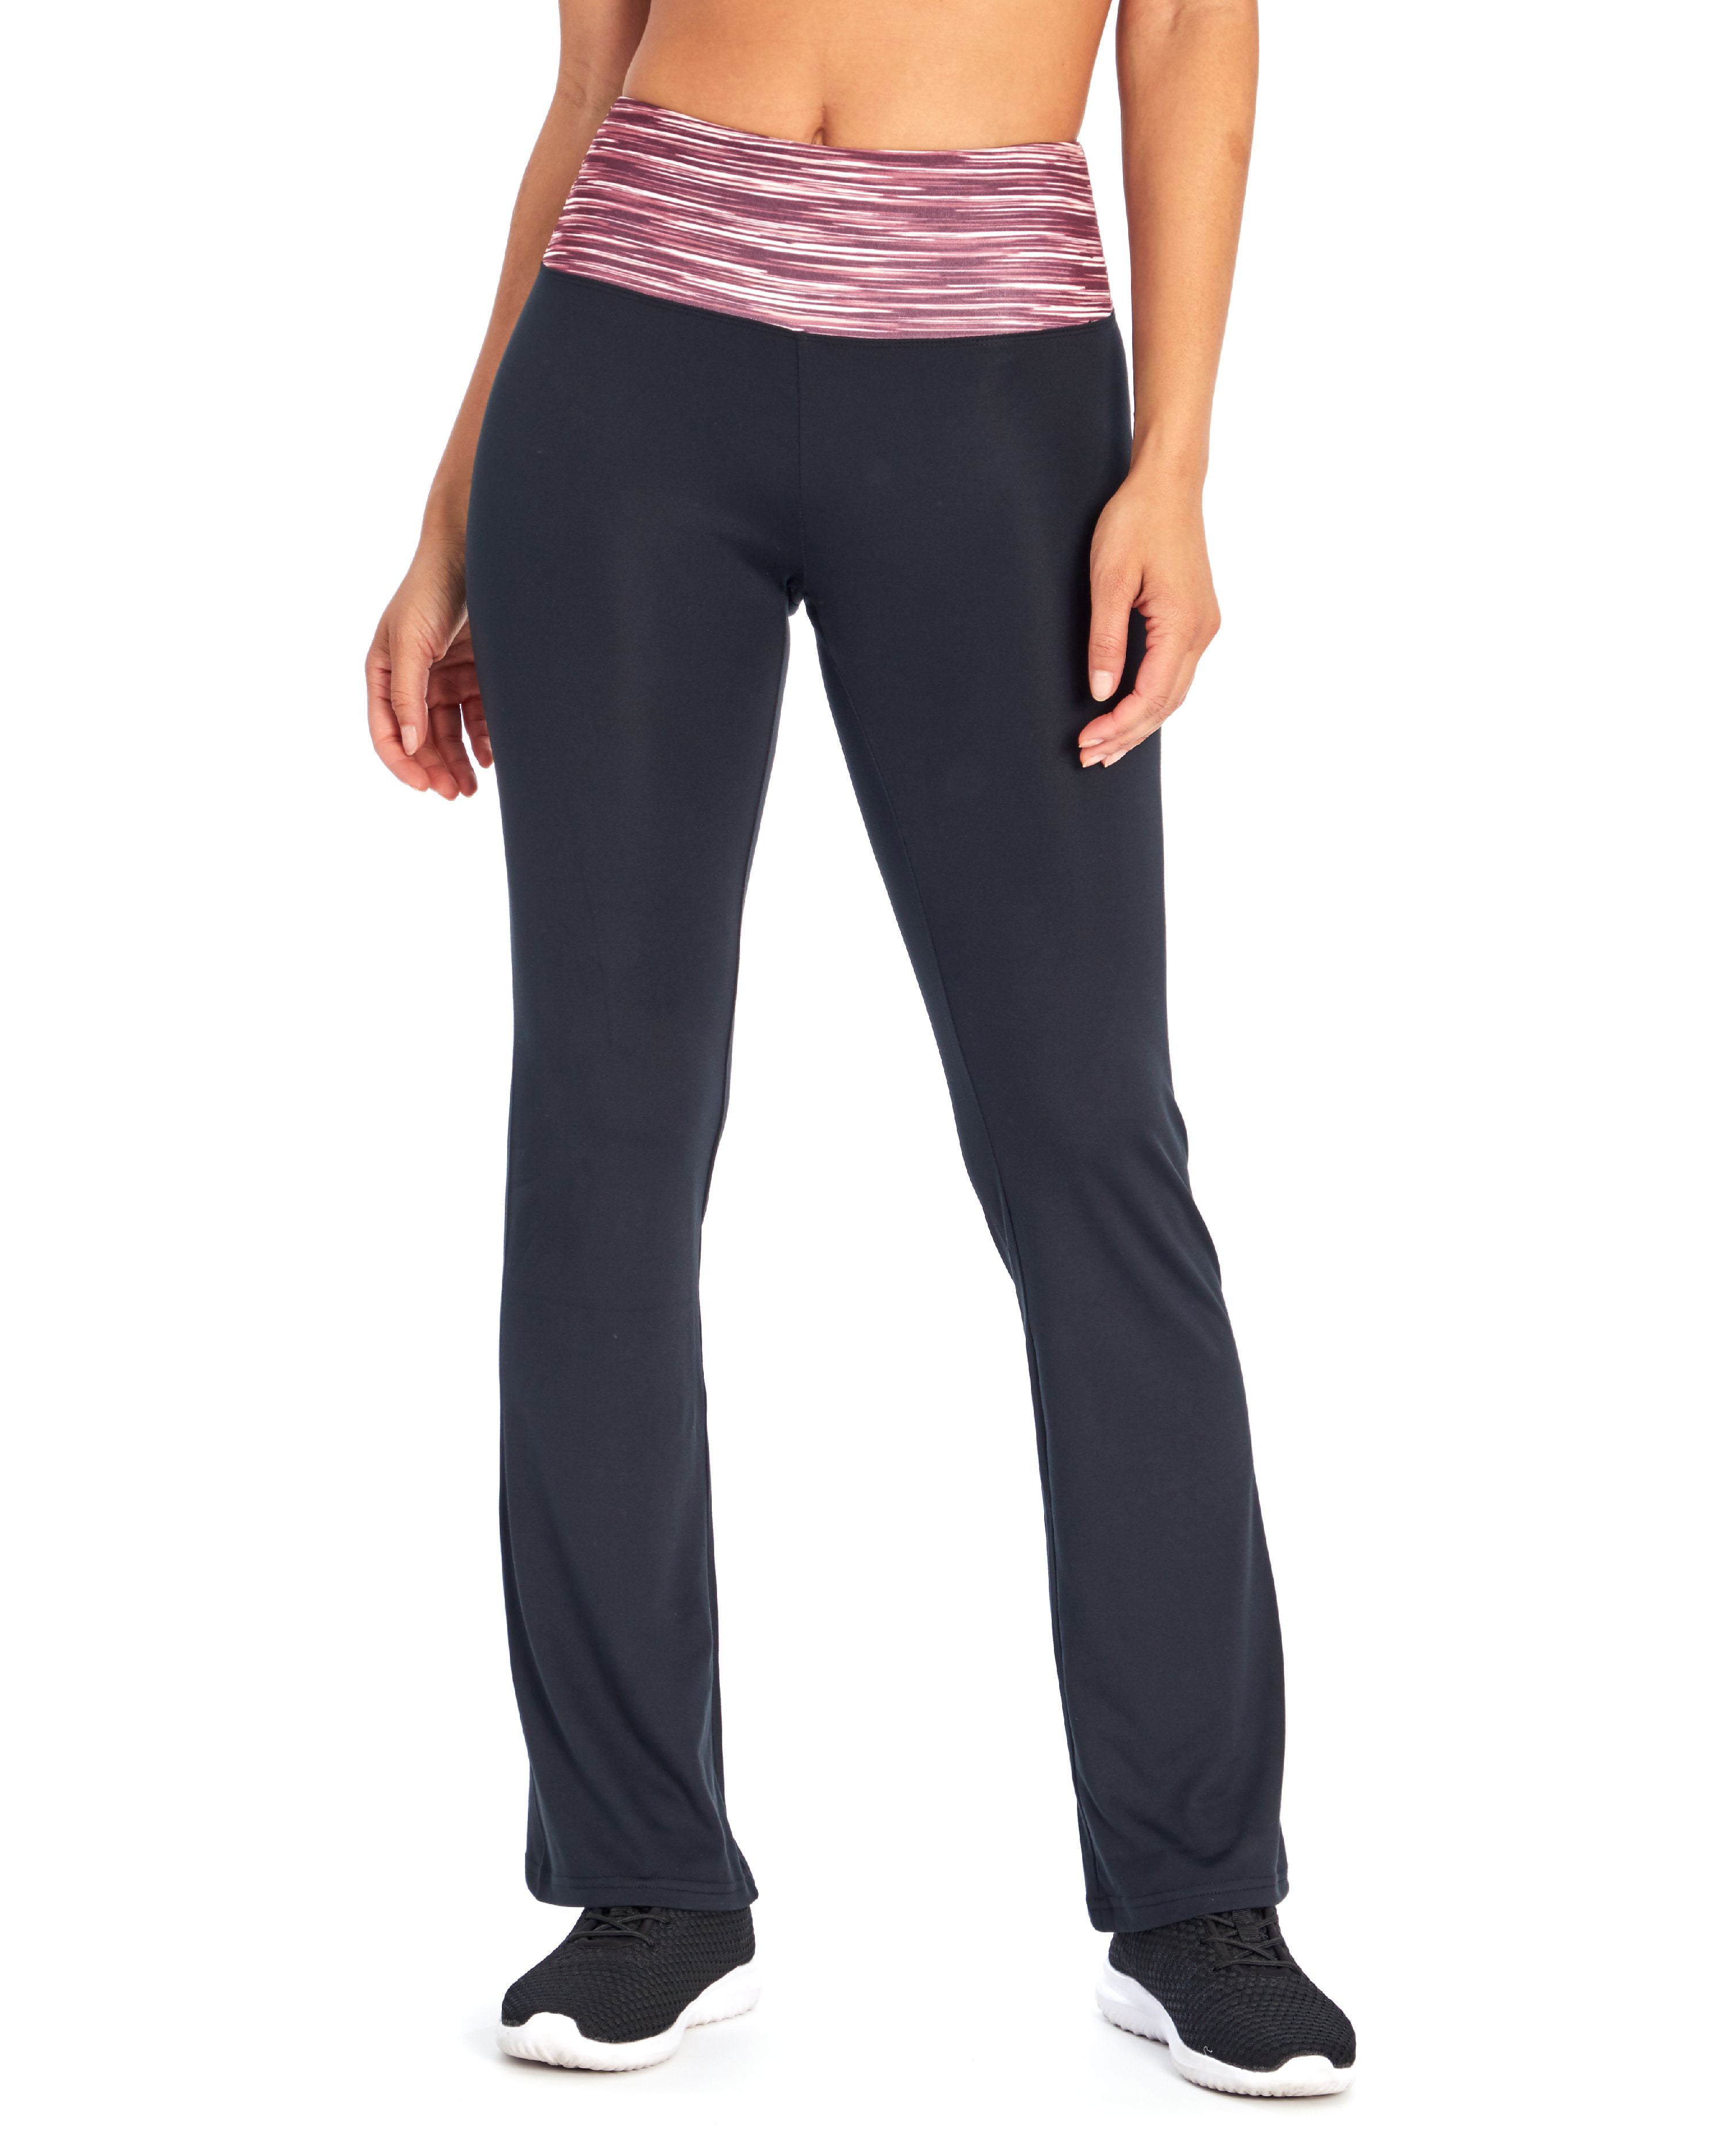 Bally Total Fitness Women's Active Barely Flare Pant